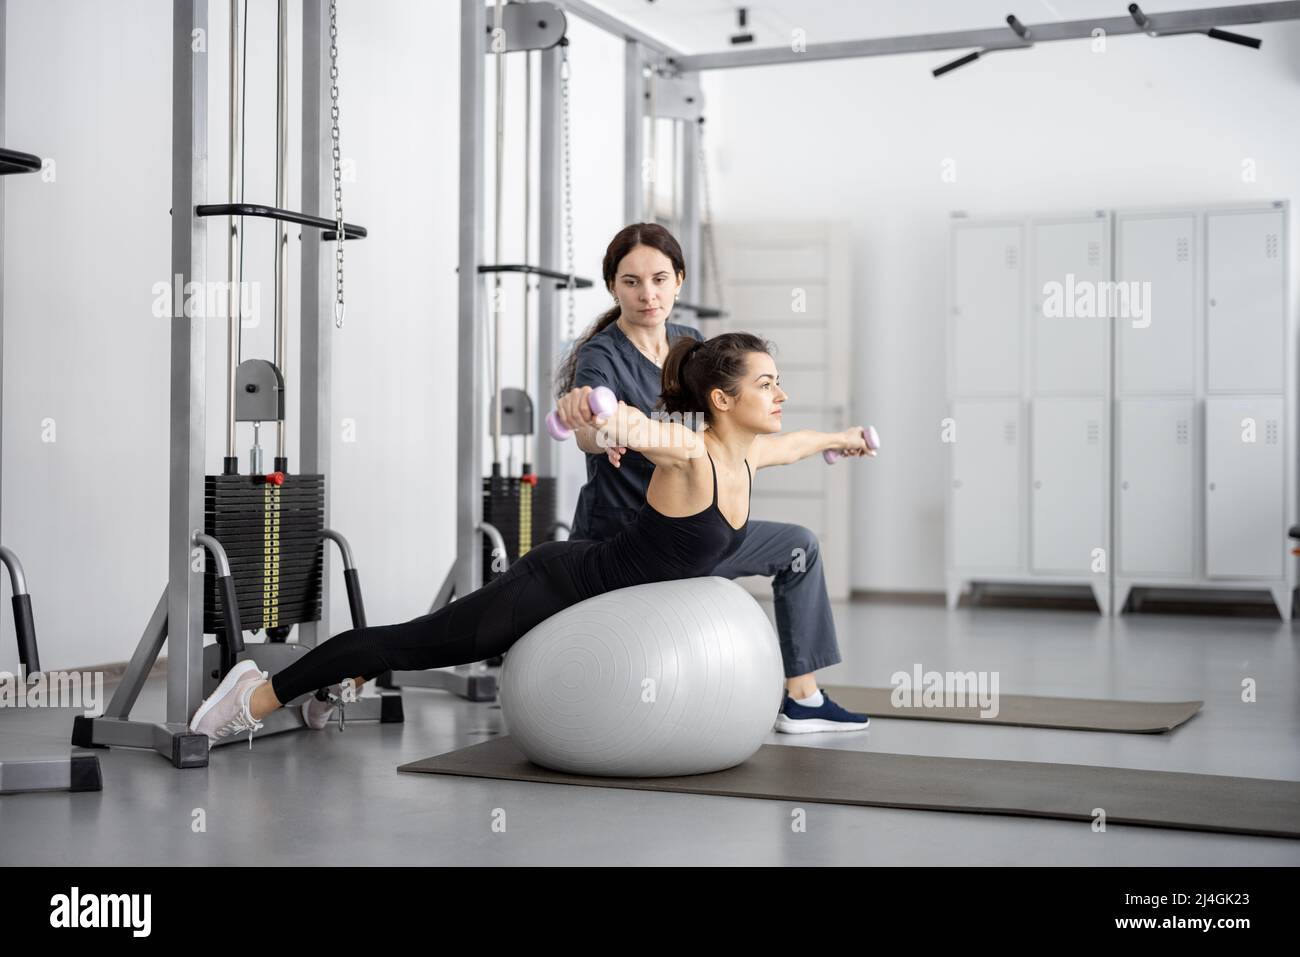 Woman doing exercises on fitness ball and dumbbells with rehabilitation specialist at the gym Stock Photo